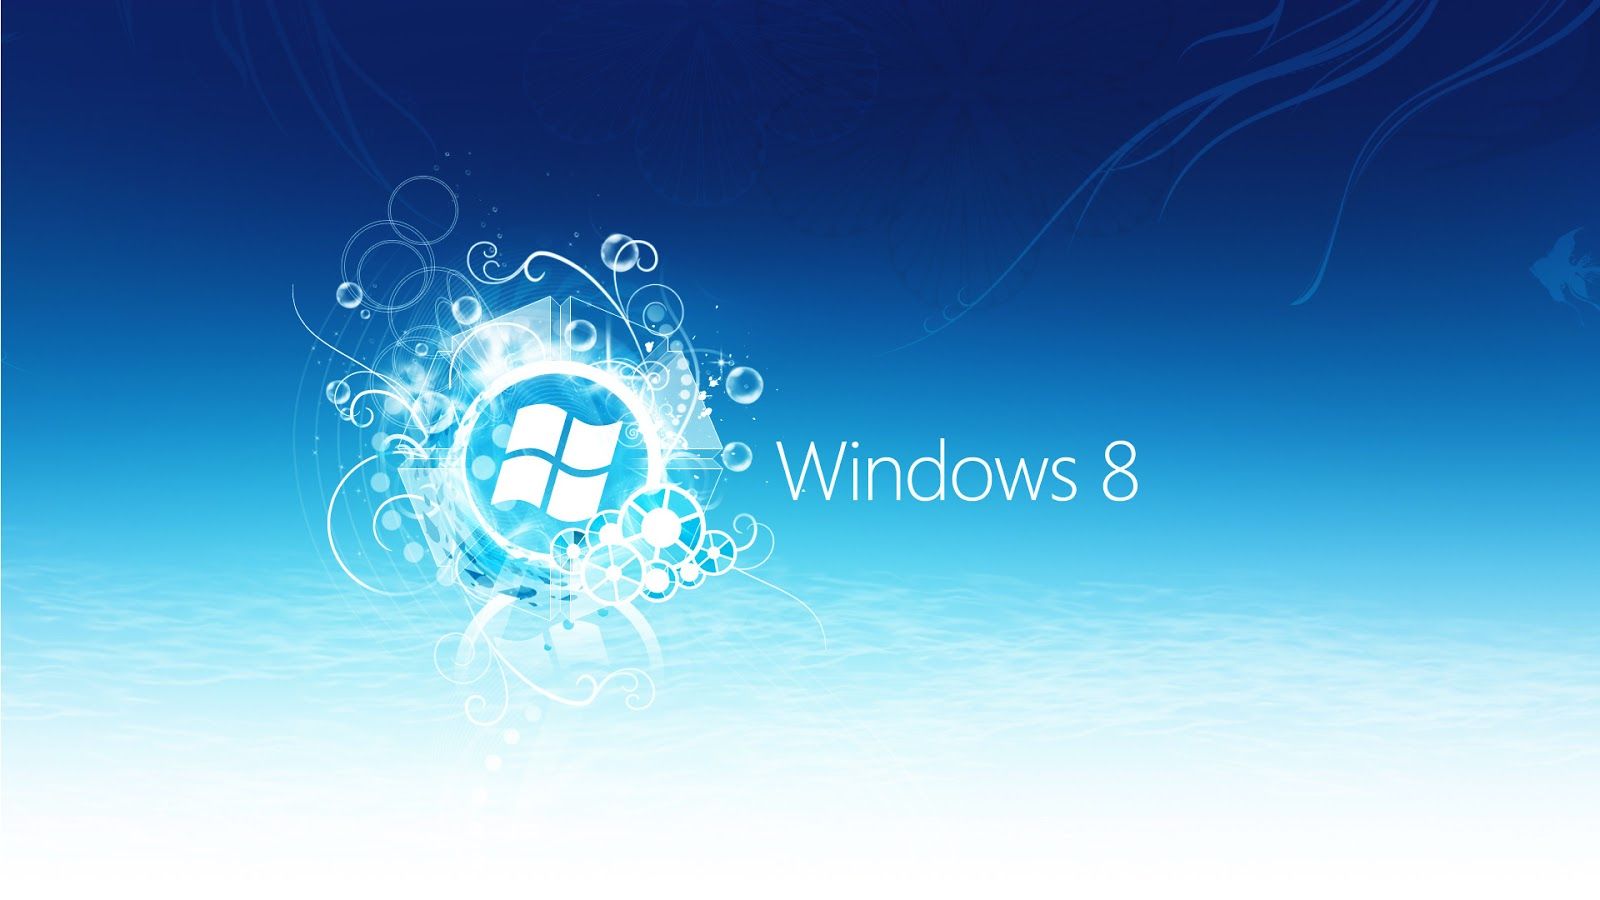 Downloading And Information: Windows 8 Blue Look in 3D Wallpaper